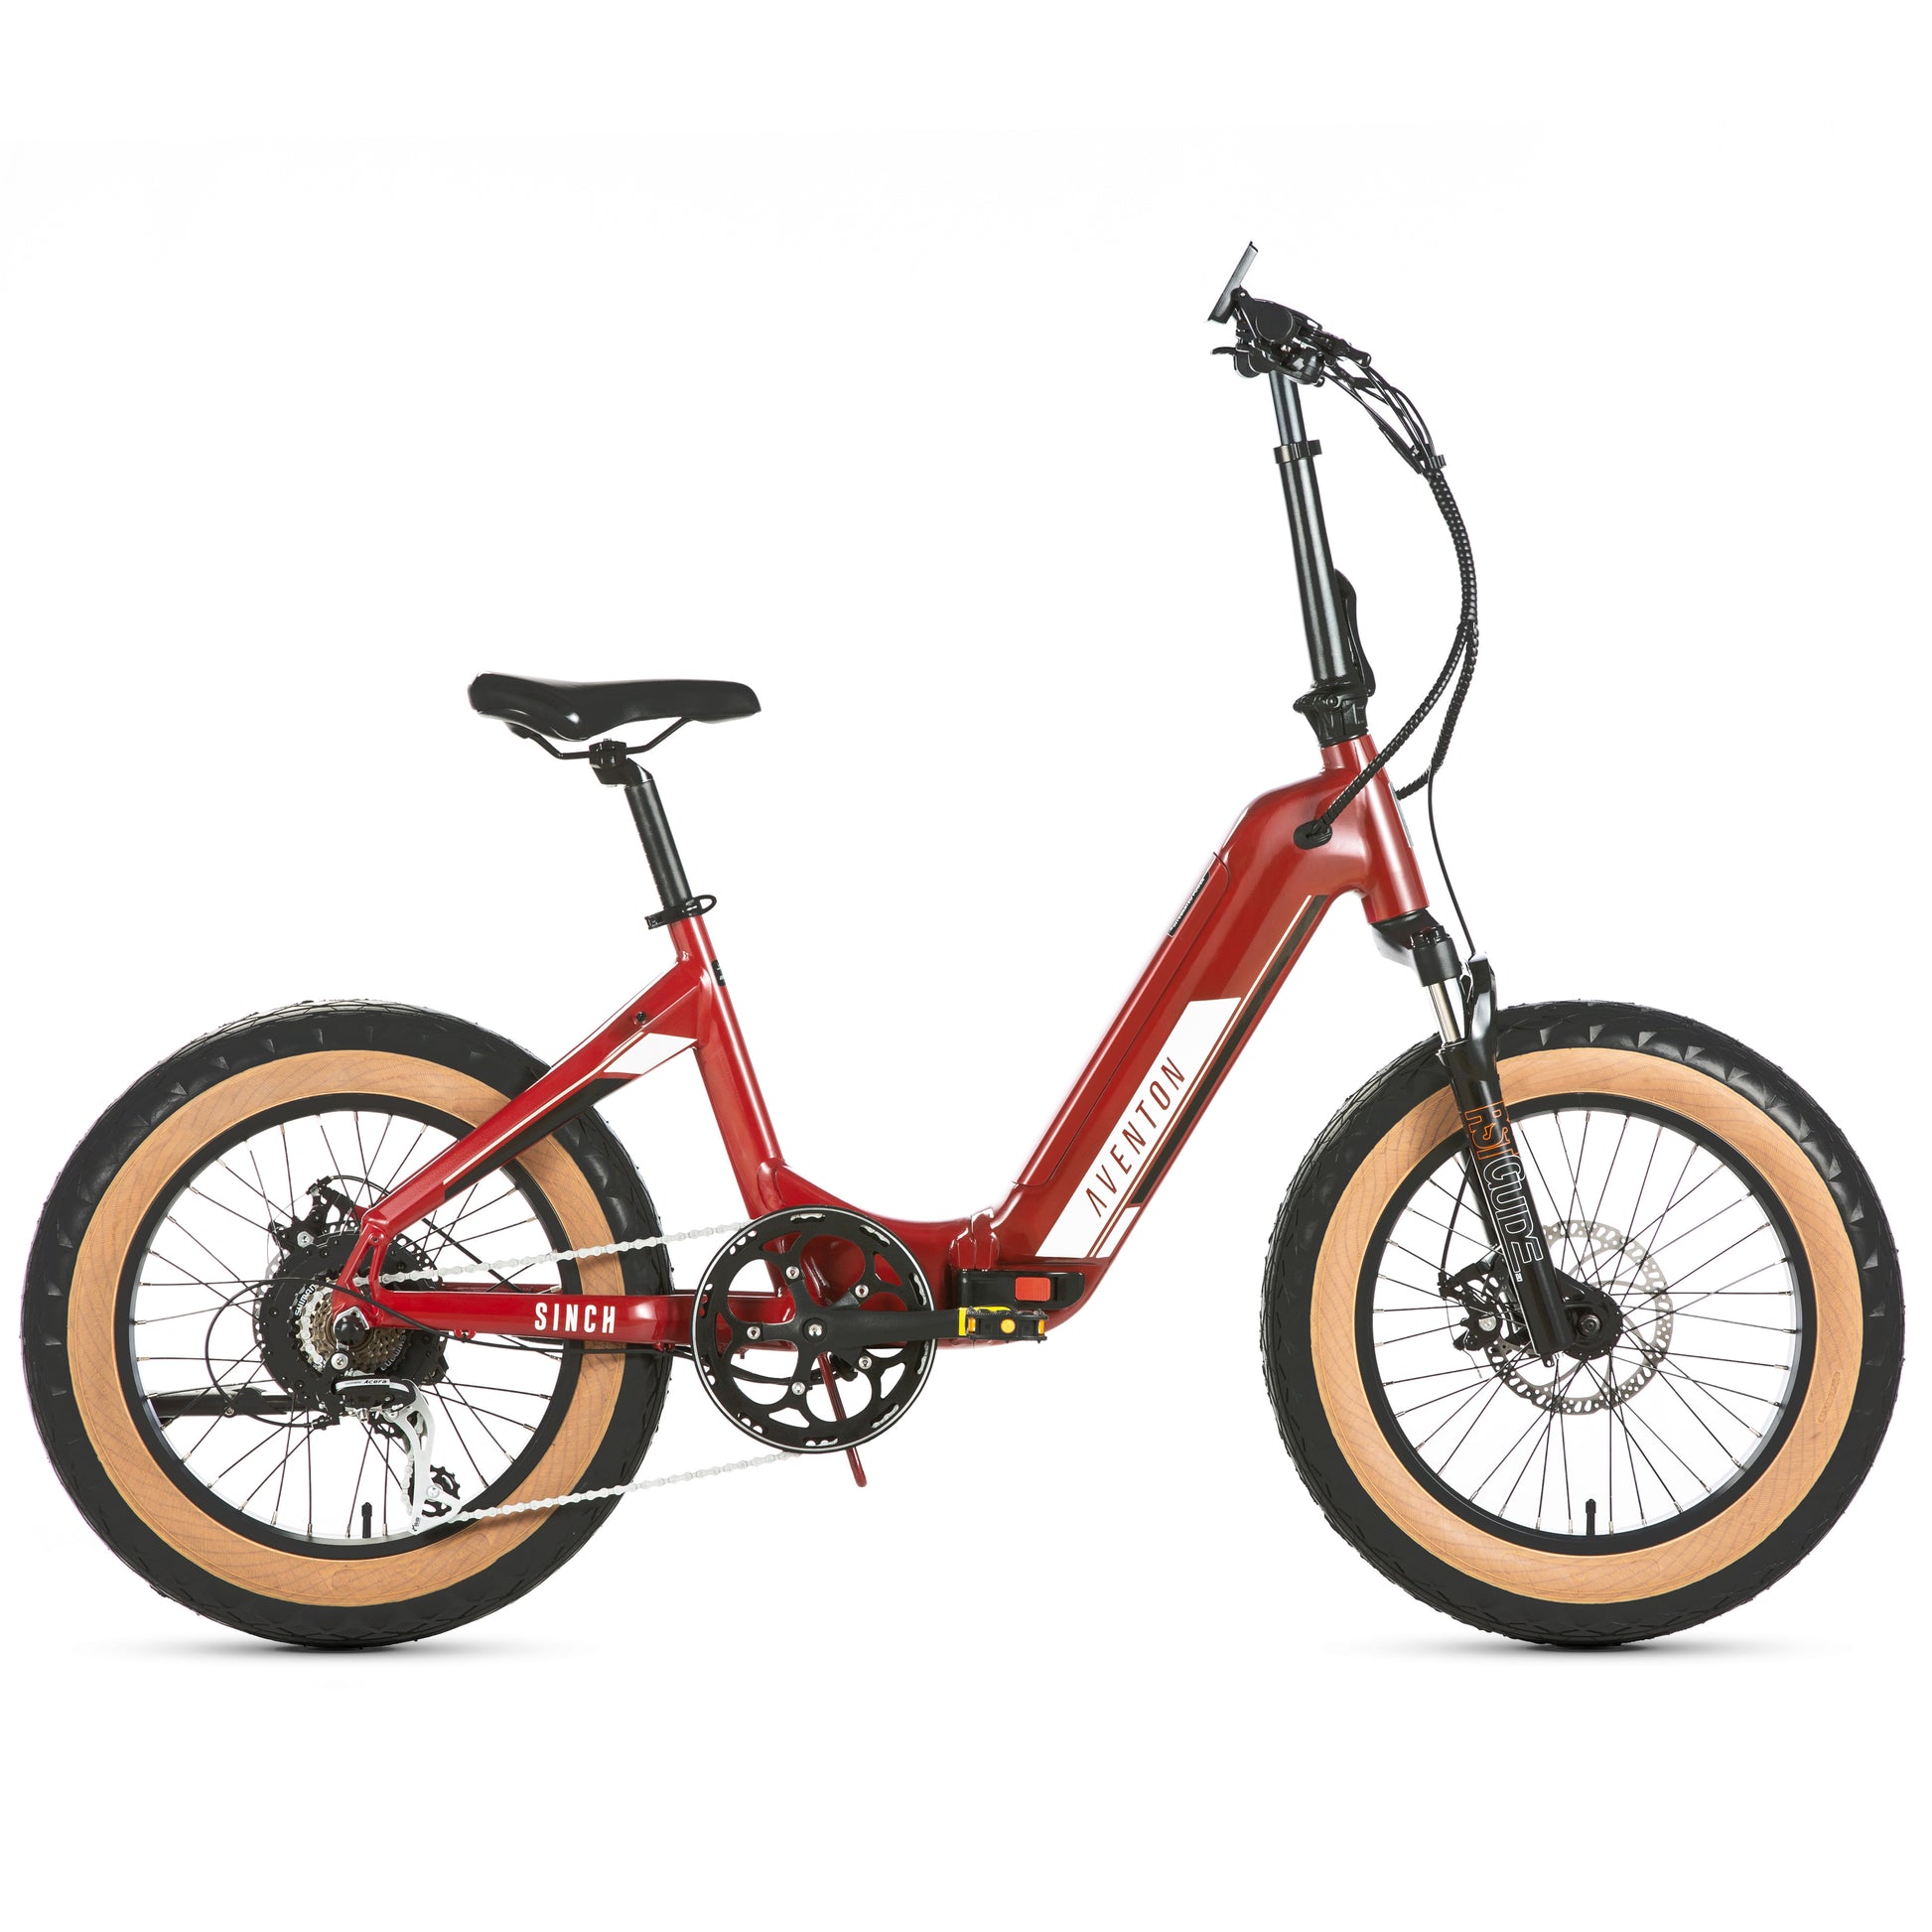 A foldable Aventon Sinch electric bike in Bonfire Red against a white background.